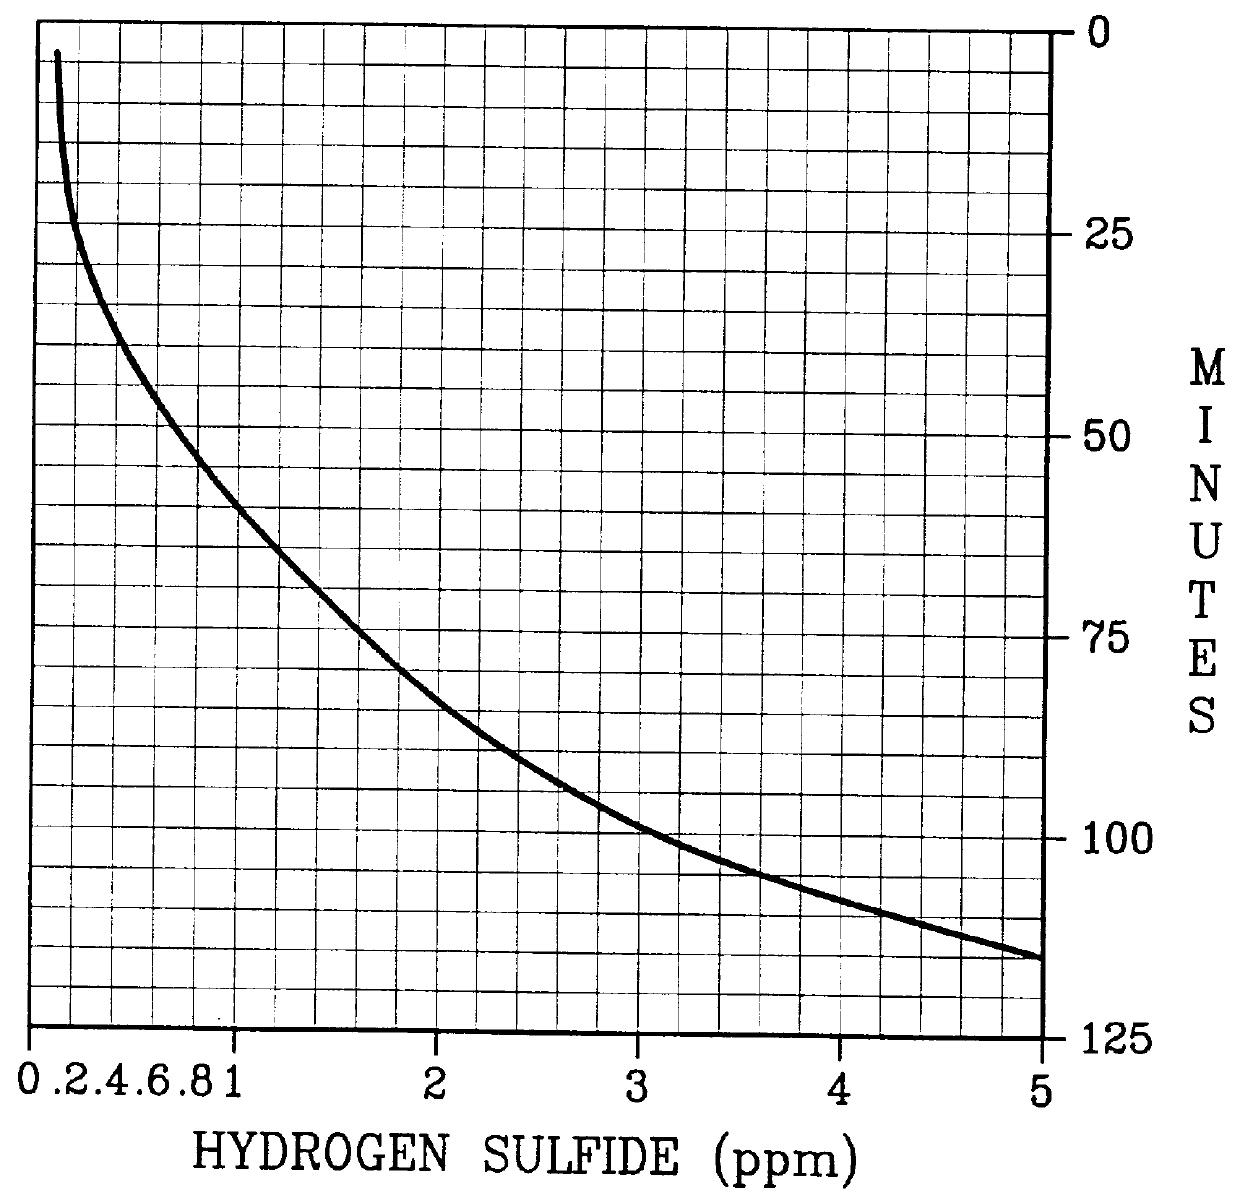 Hydrogen sulfide removal methods